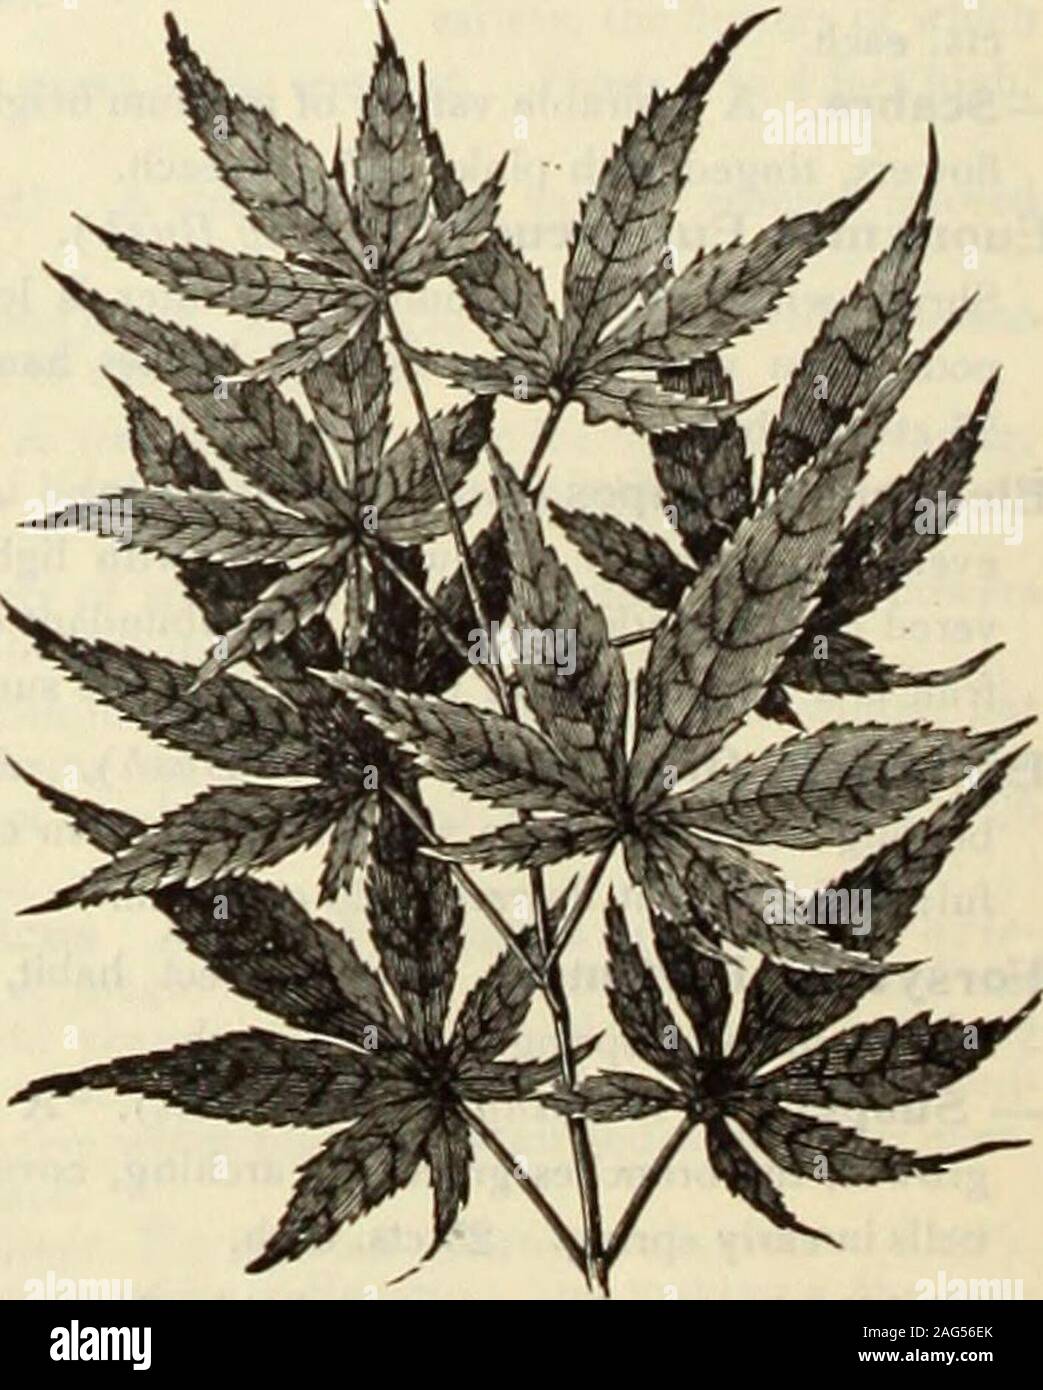 . Dreer's 1913 garden book. Japanese Maple. AU Prices include boxes, packing and delivery free to any transportation company in Philadelphia. fOffUlHRrADKa•IHHADHftHA-^-S CHOICE HARDY SHRUBS j]ff| 249 Pavla Macrostachya {Dwarf Horse Chestnut or Buckeye). Formsa broad, round bush with deep green foliage, and in July bears a mass ofbeautiful upright spikes of white blossoms. 25 cts. each. Philadelphia Boule d Argent. Very large double white flowers inJune; graceful habit. 25 cts. each. — Conquete. Large single flowers in clusters of 3 to 5, completelycovering the plant. 25 cts. each. — Coronariu Stock Photo